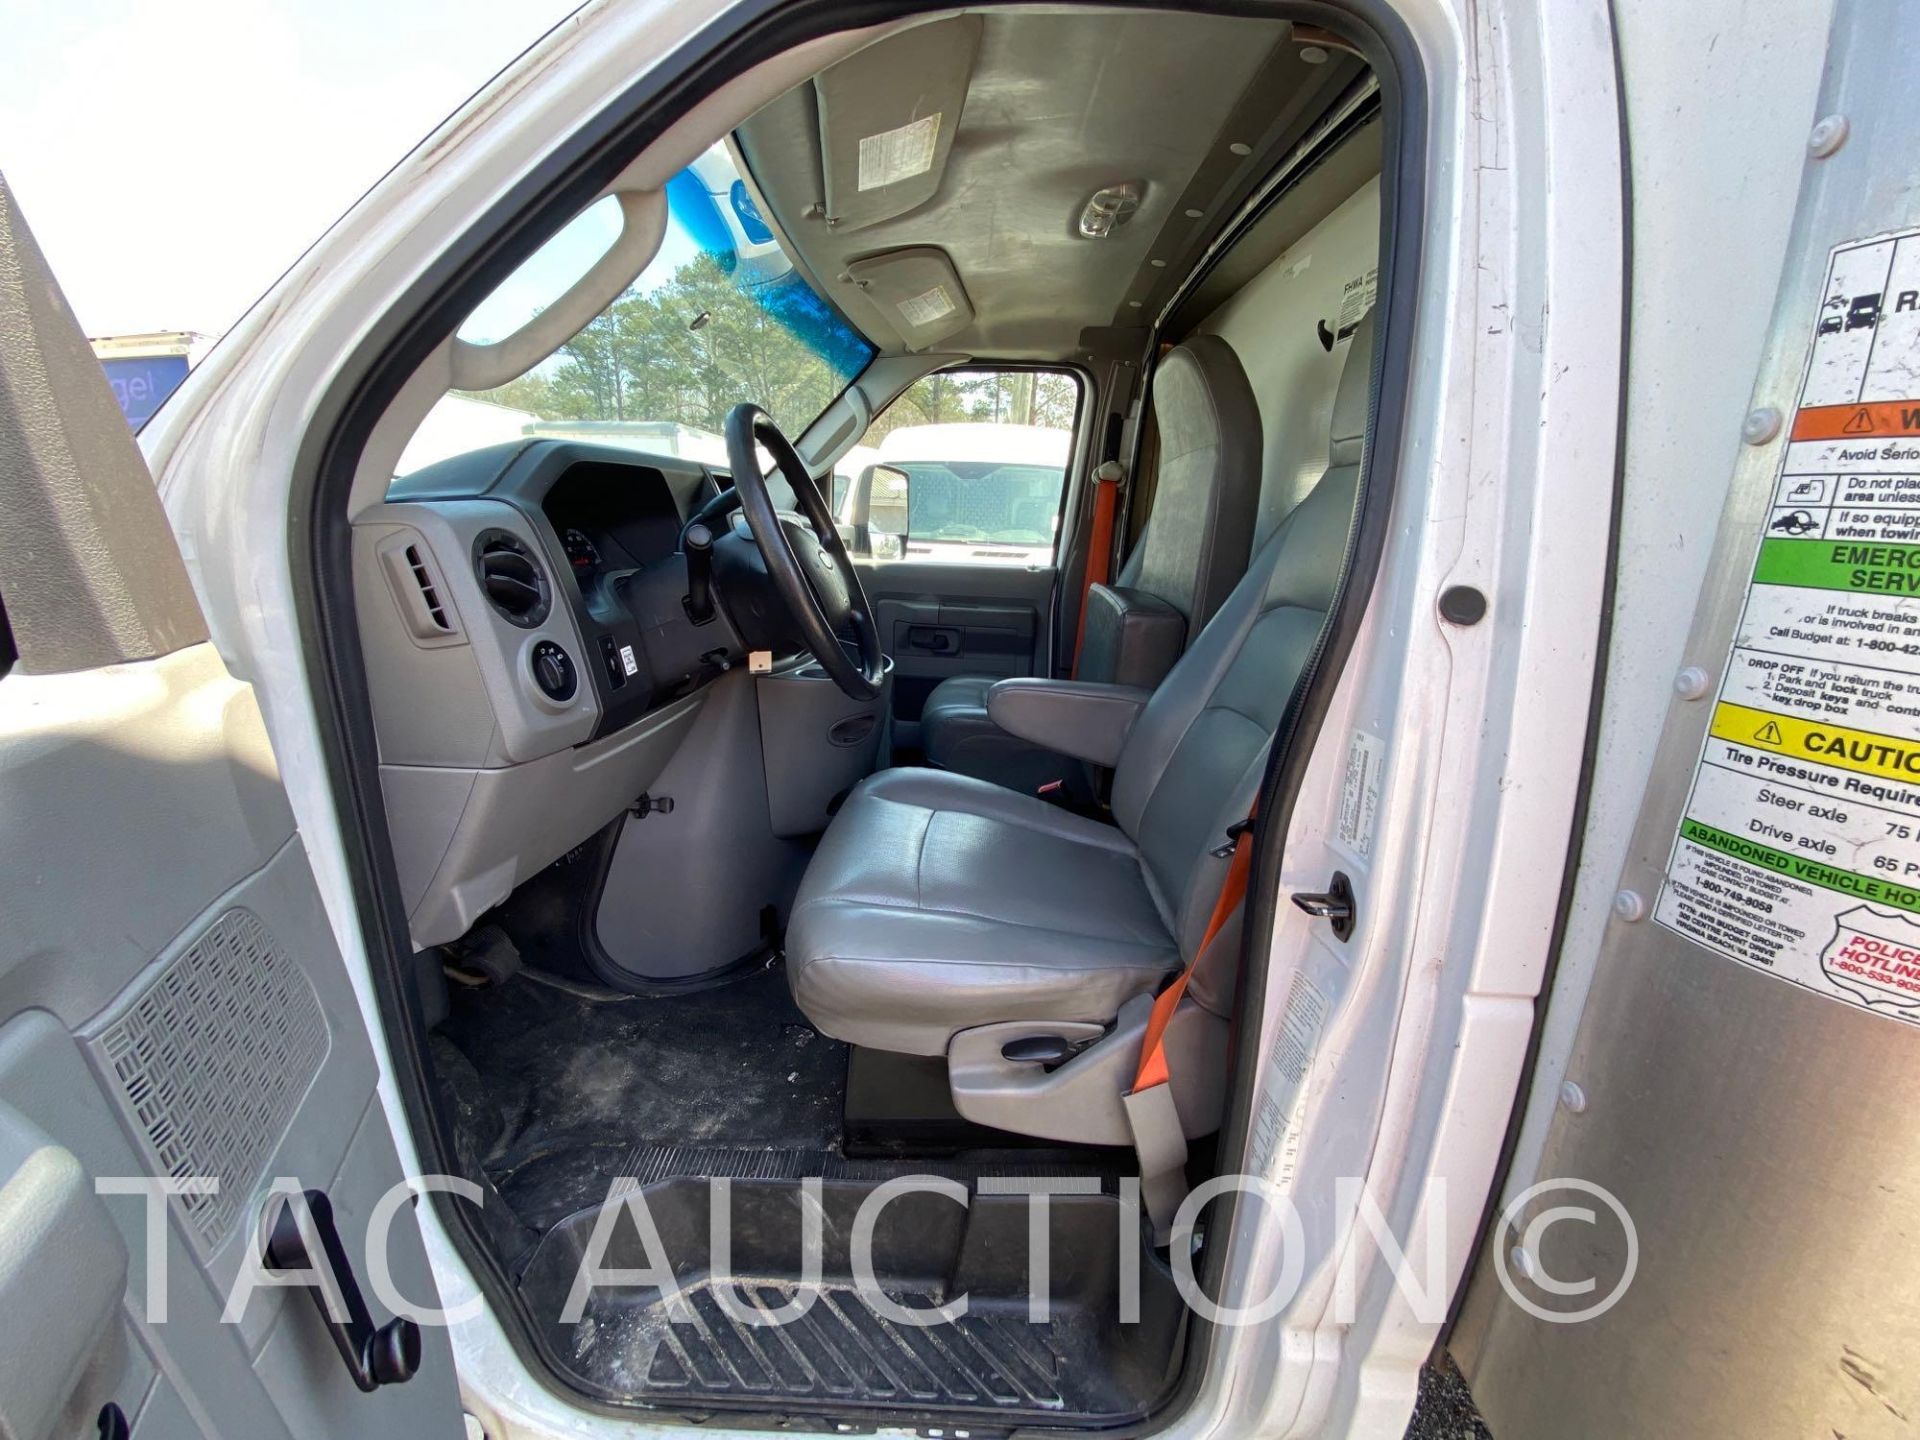 2016 Ford E-350 16ft Box Truck - Image 24 of 50